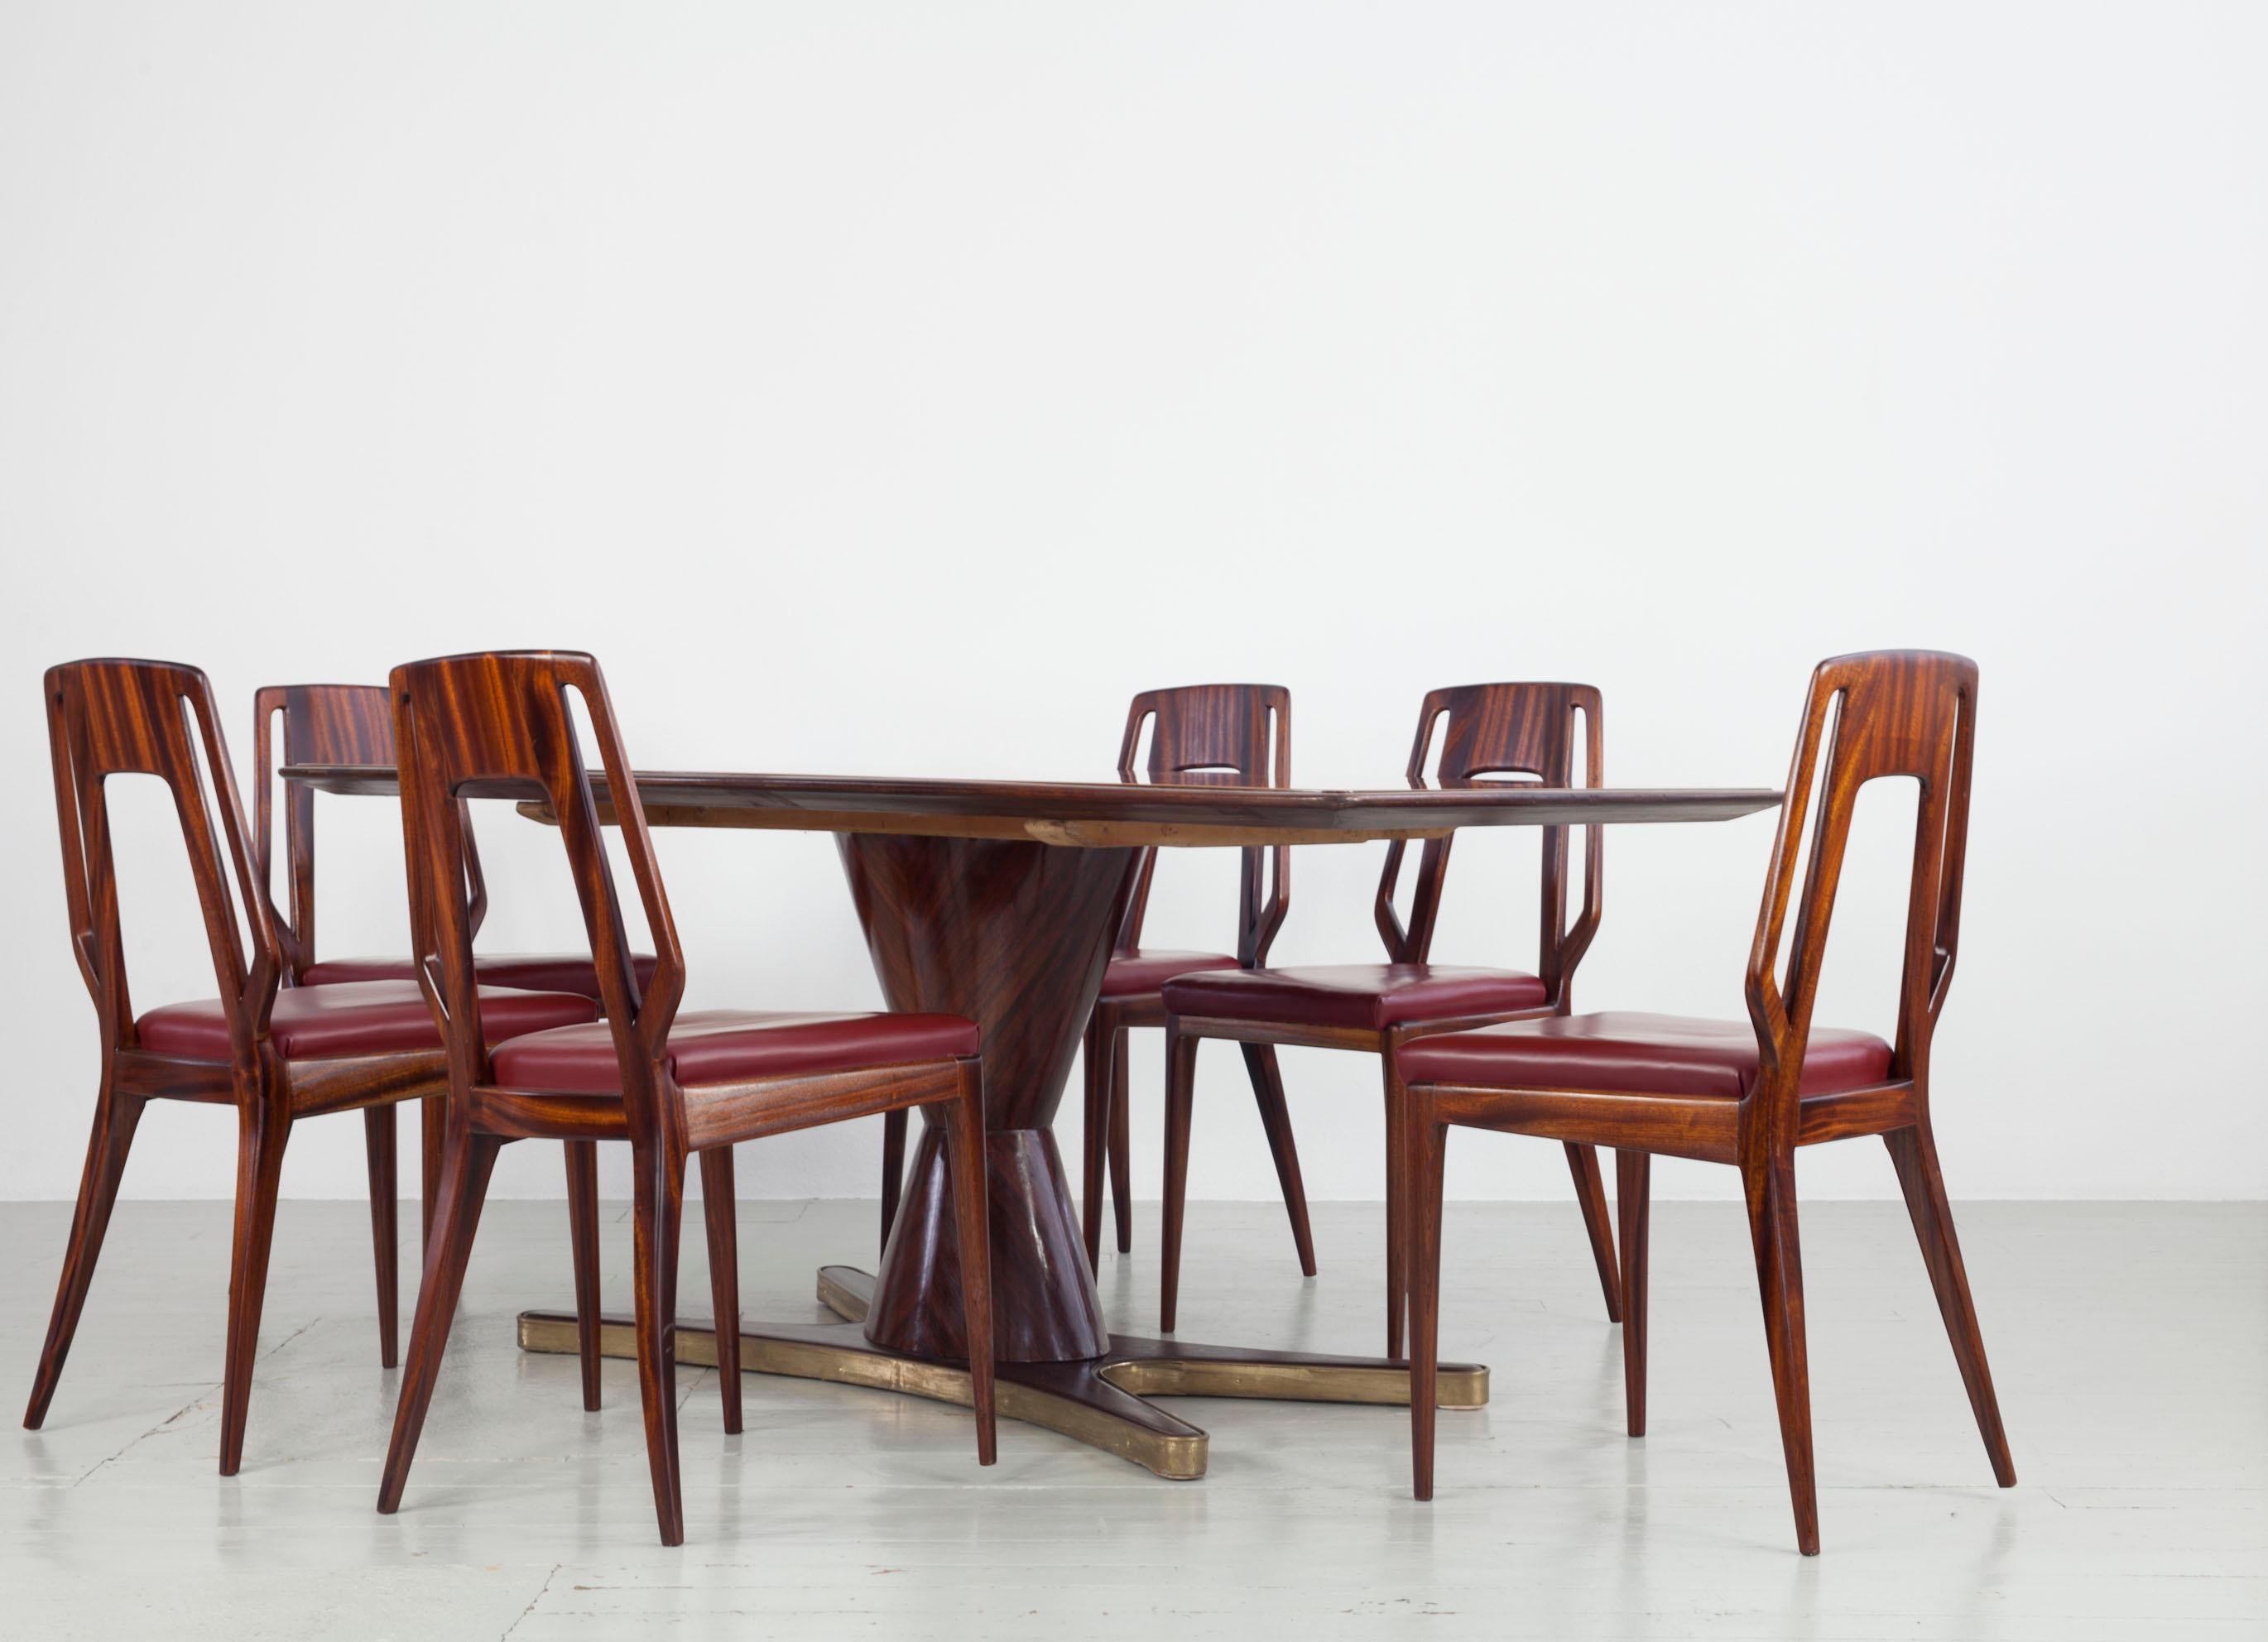 Set of 6 Italian Vittorio Dassi Dining Room Chairs, 1950s For Sale 11